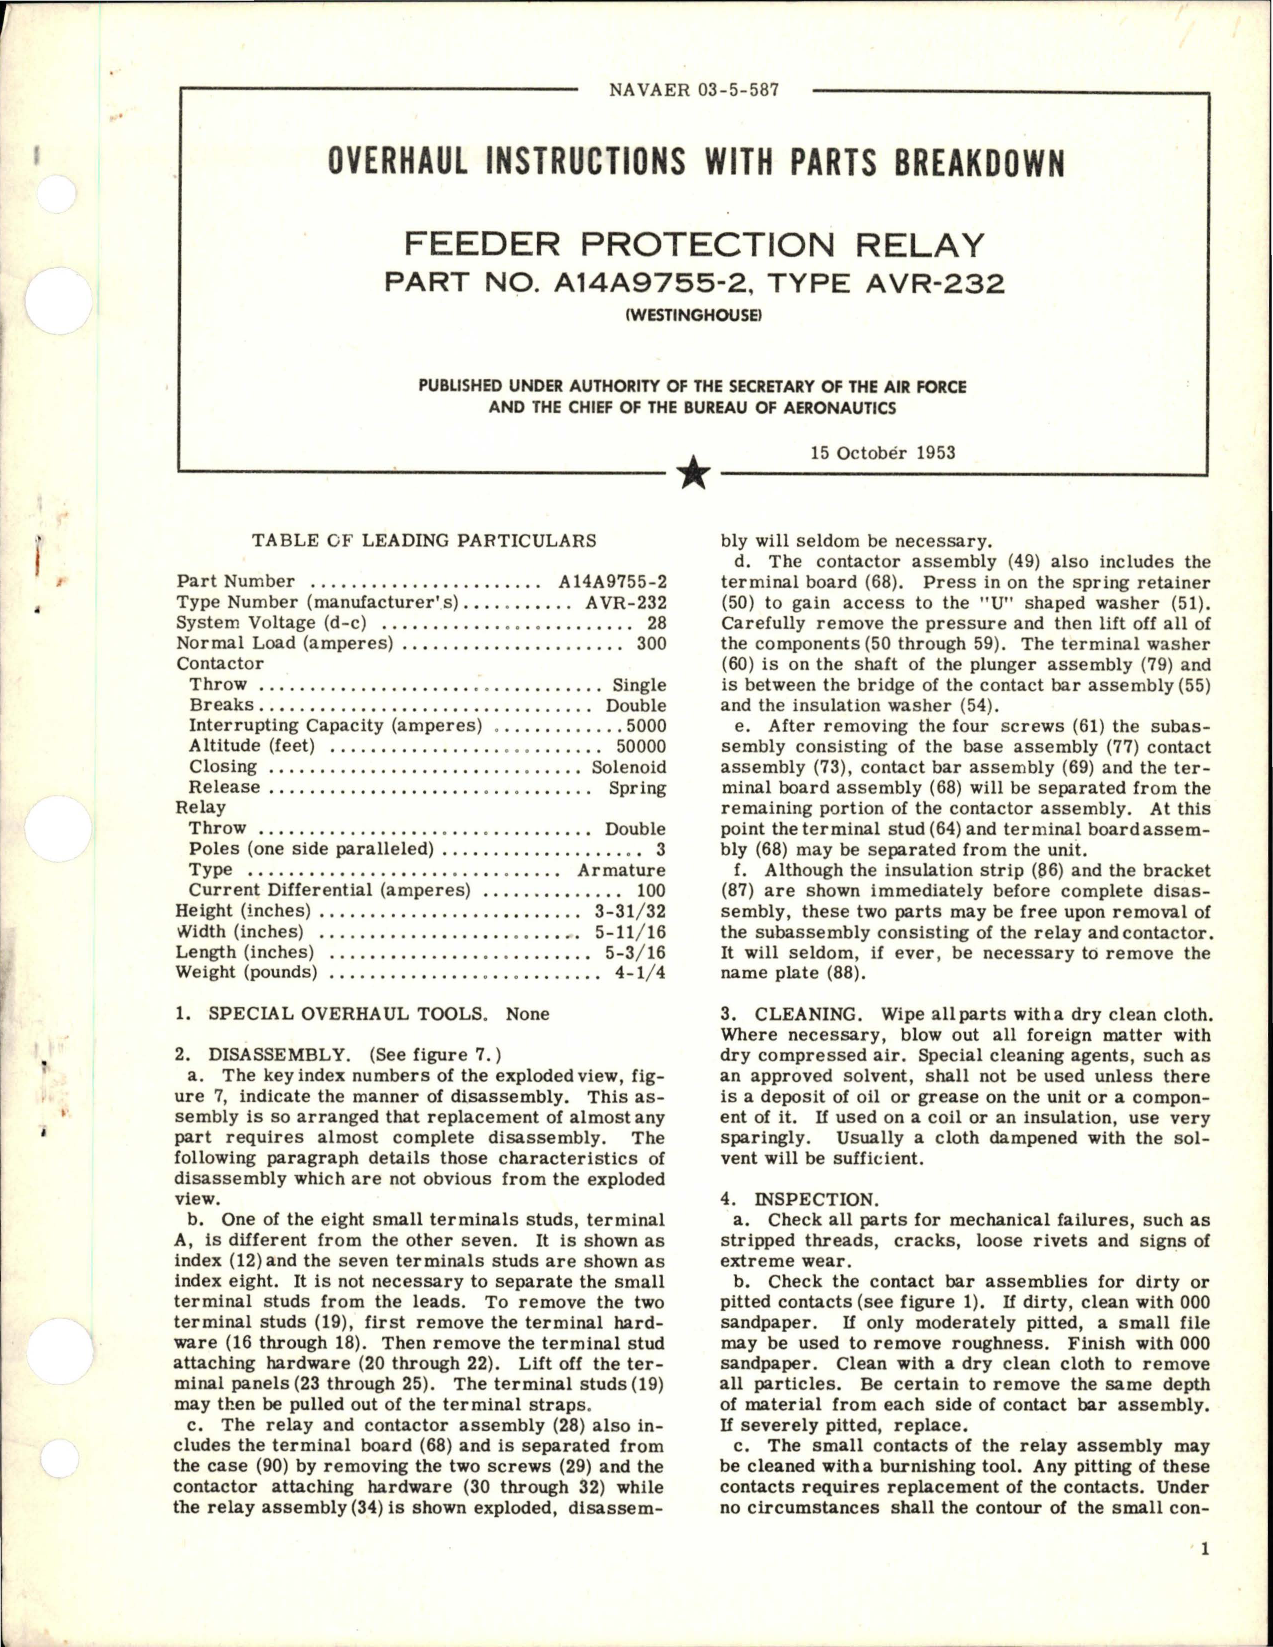 Sample page 1 from AirCorps Library document: Overhaul Instructions with Parts Breakdown for Feeder Protection Relay - Part A14A9755-2 - Type AVR-232